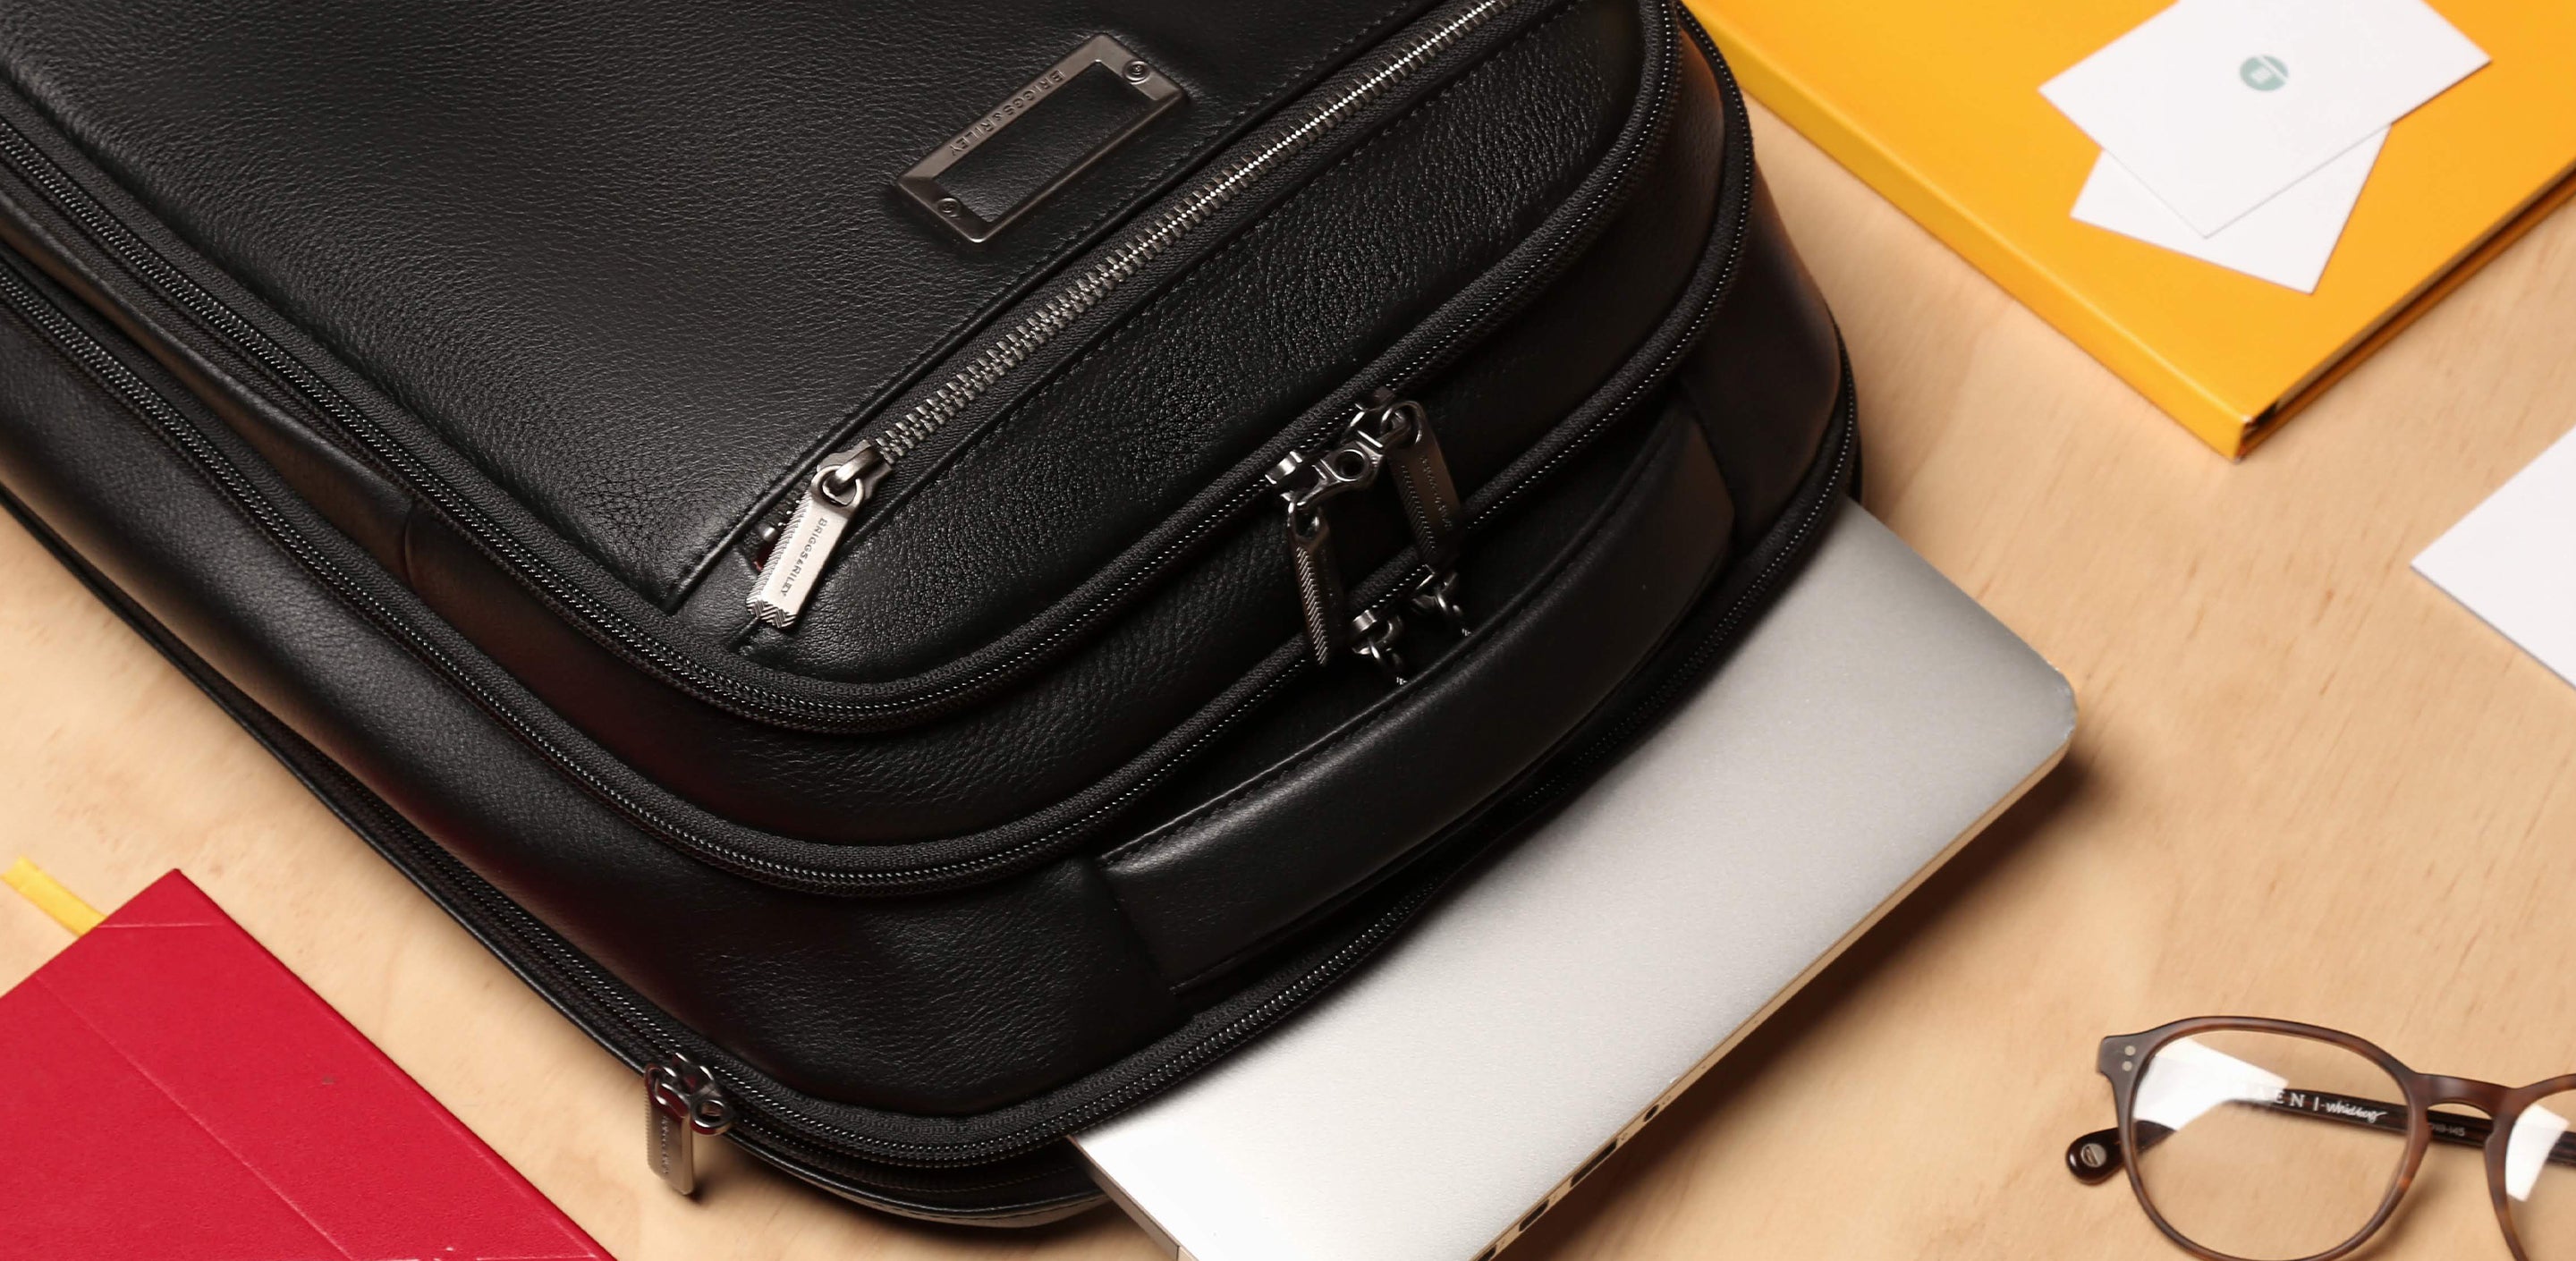 Best Sellers: The most popular items in Laptop Roller Cases